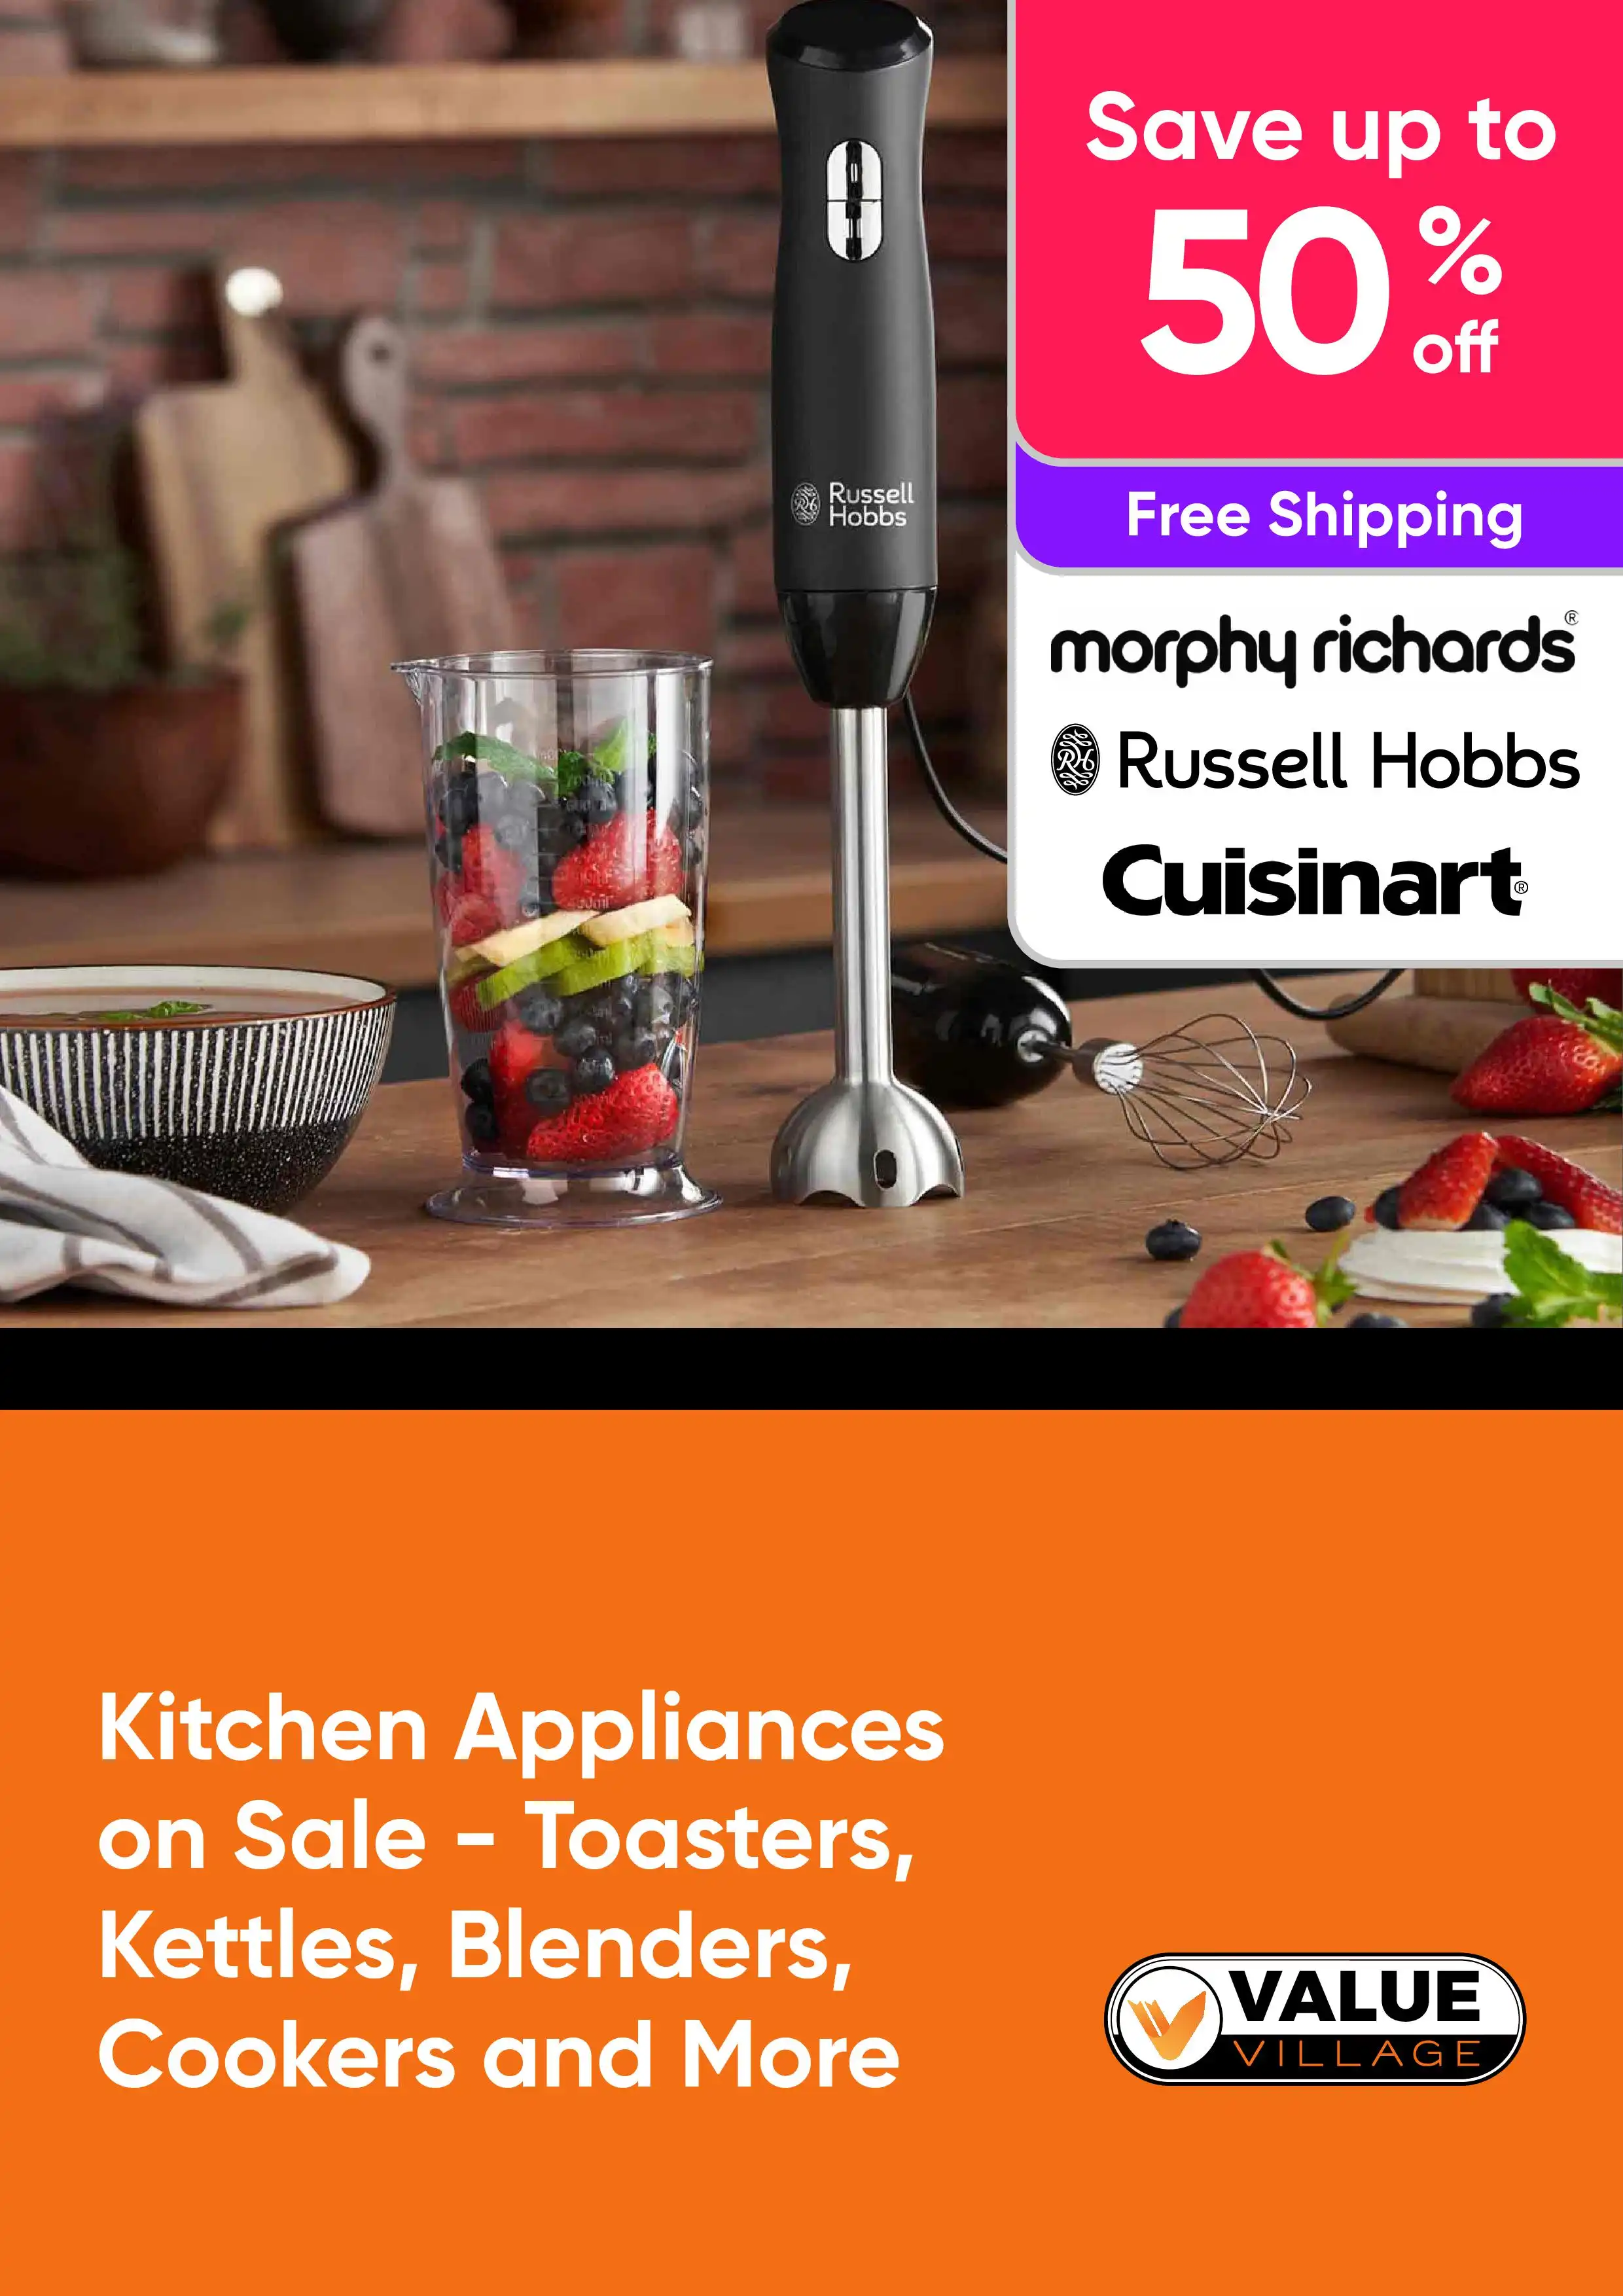 Kitchen Appliances on Sale - Toasters, Kettles, Blenders, Cookers and More - Morphy Richards, Russell Hobbs, Cuisinart - Up to 50% Off 